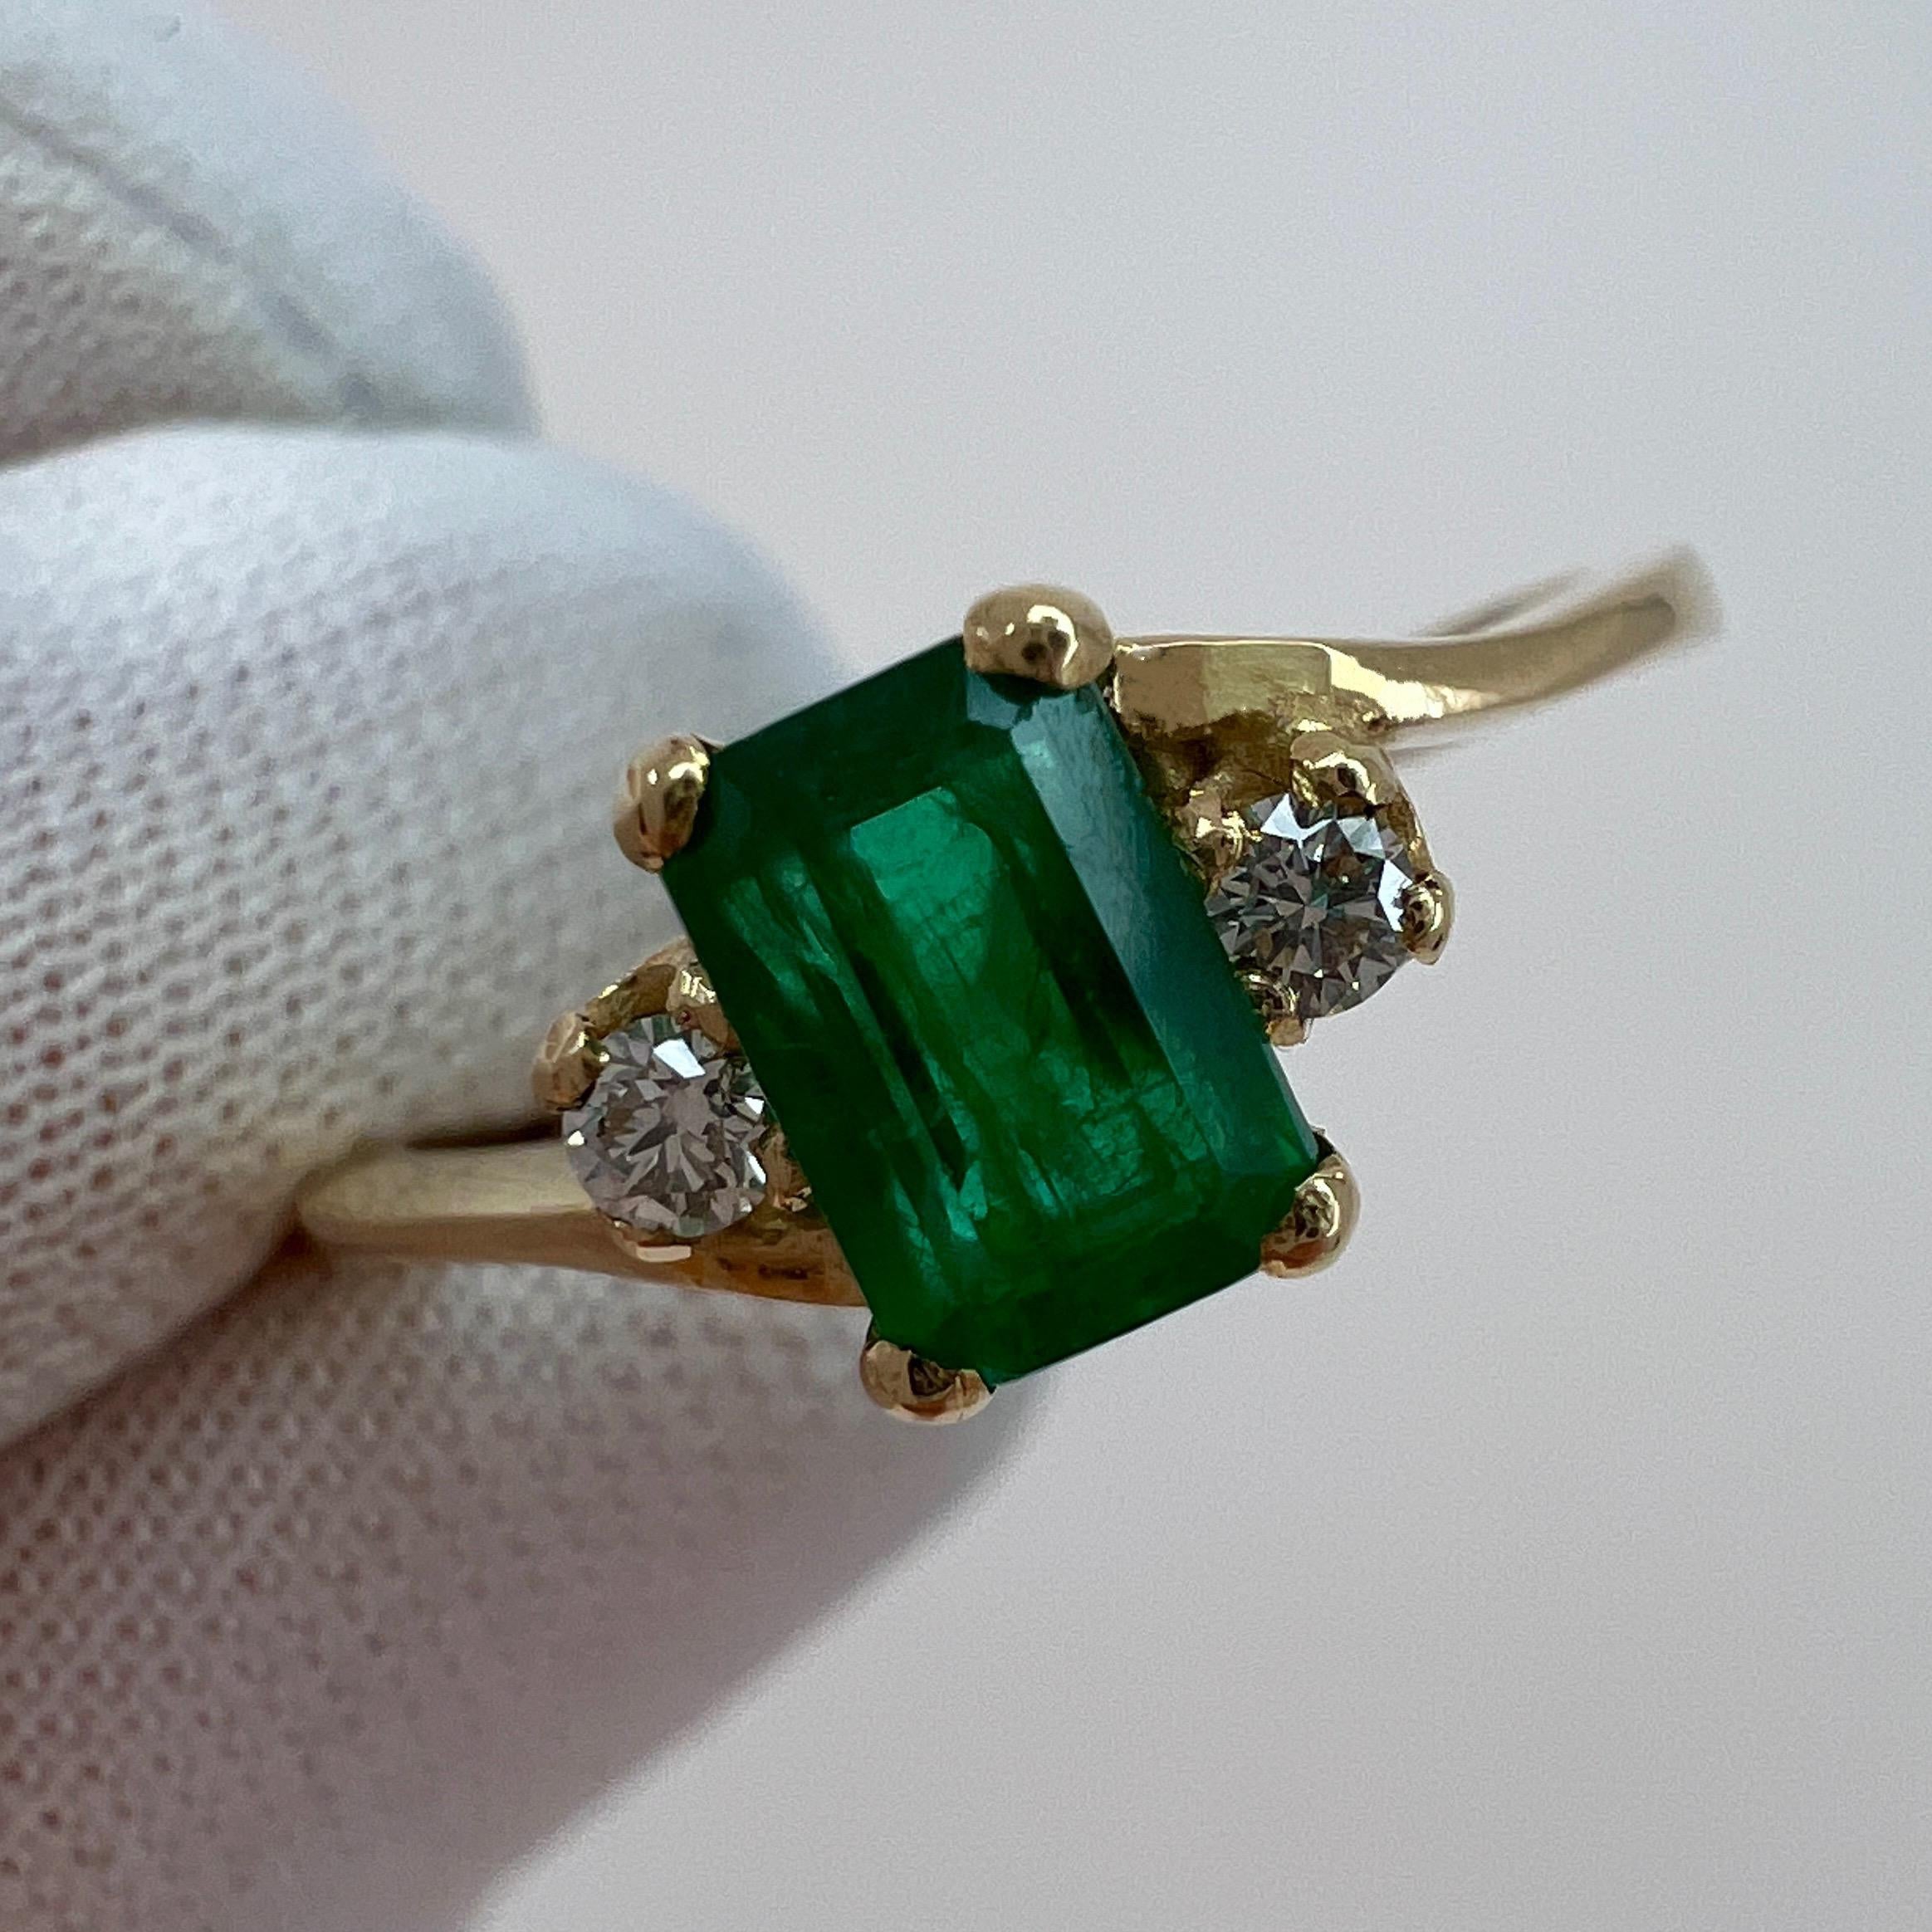 Deep Green Emerald & Diamond Three Stone Yellow Gold Ring.

IGI Certified 0.73 carat emerald with a stunning deep green colour and good clarity. Some inclusions visible, as to be expected with natural emeralds, but not a dirty stone.

Fully